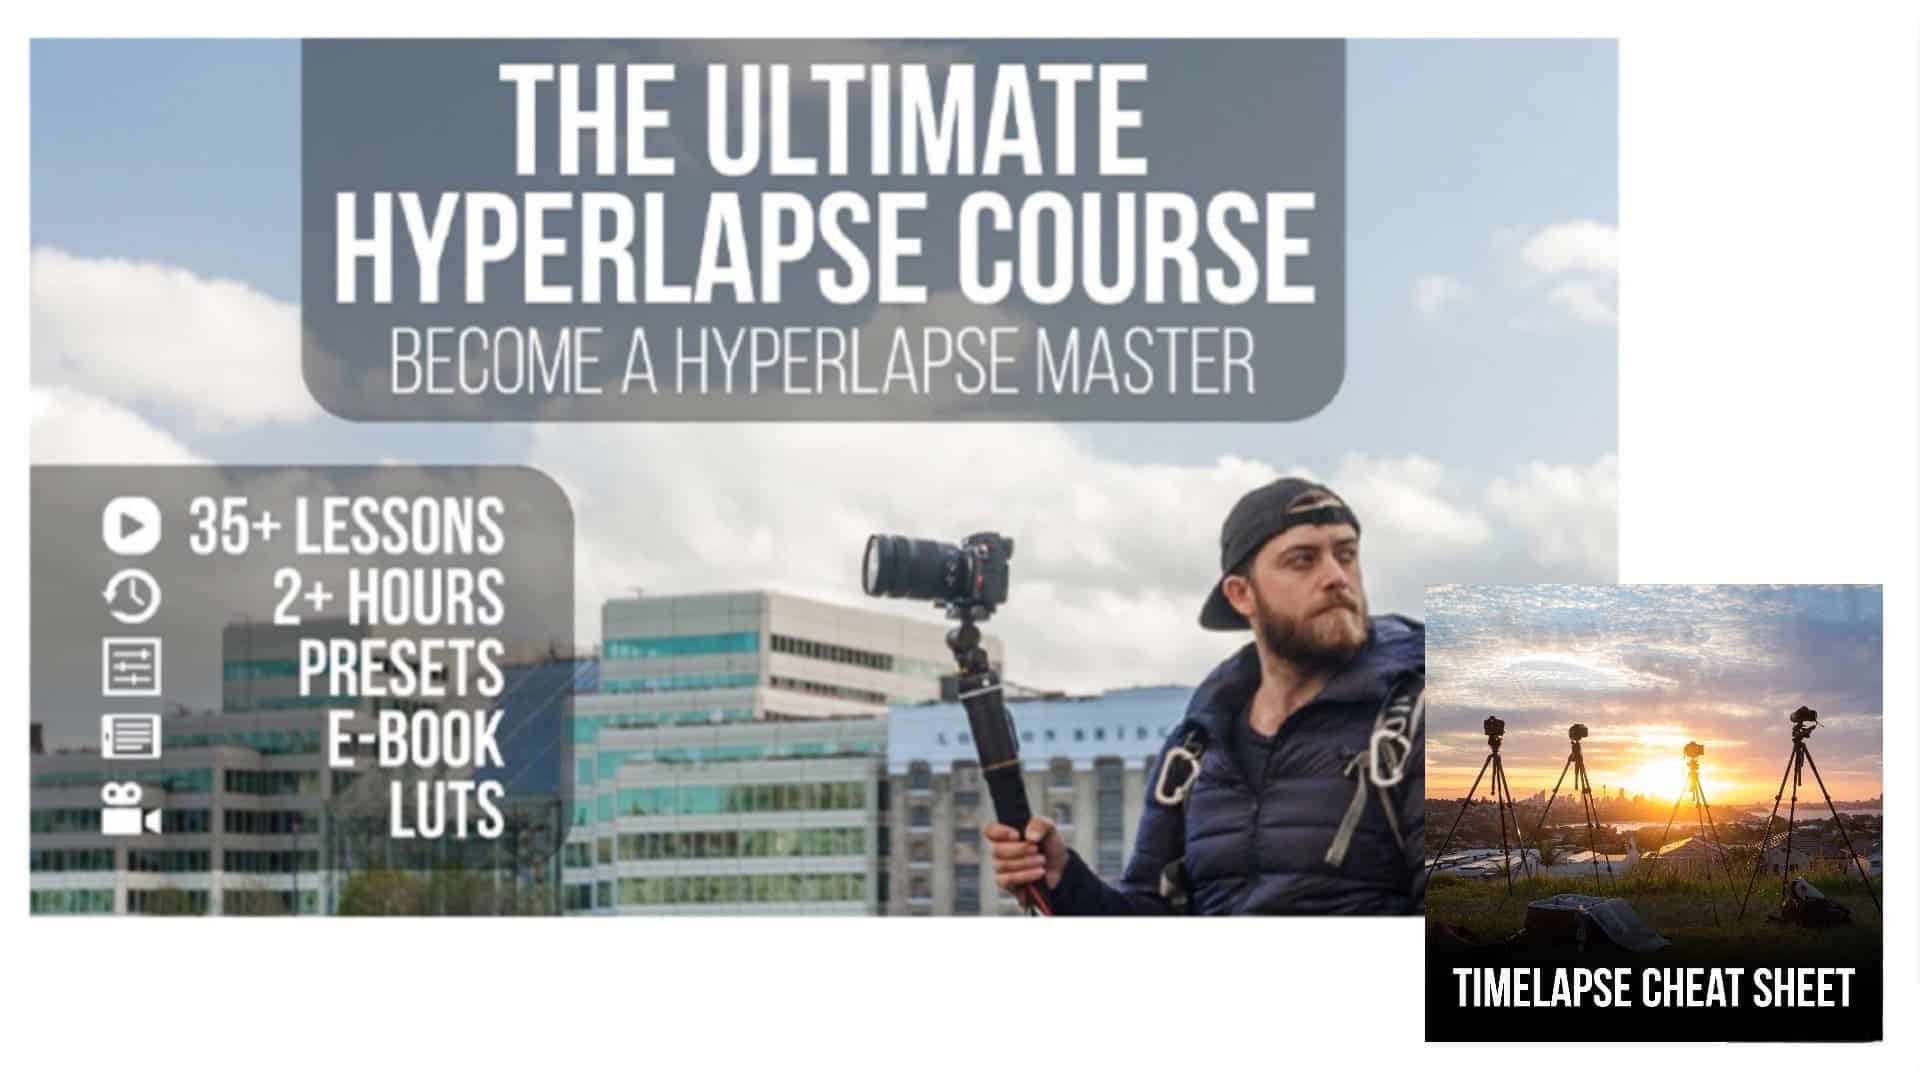 The Ultimate Hyperlapse Course + Timelapse Cheat Sheet<